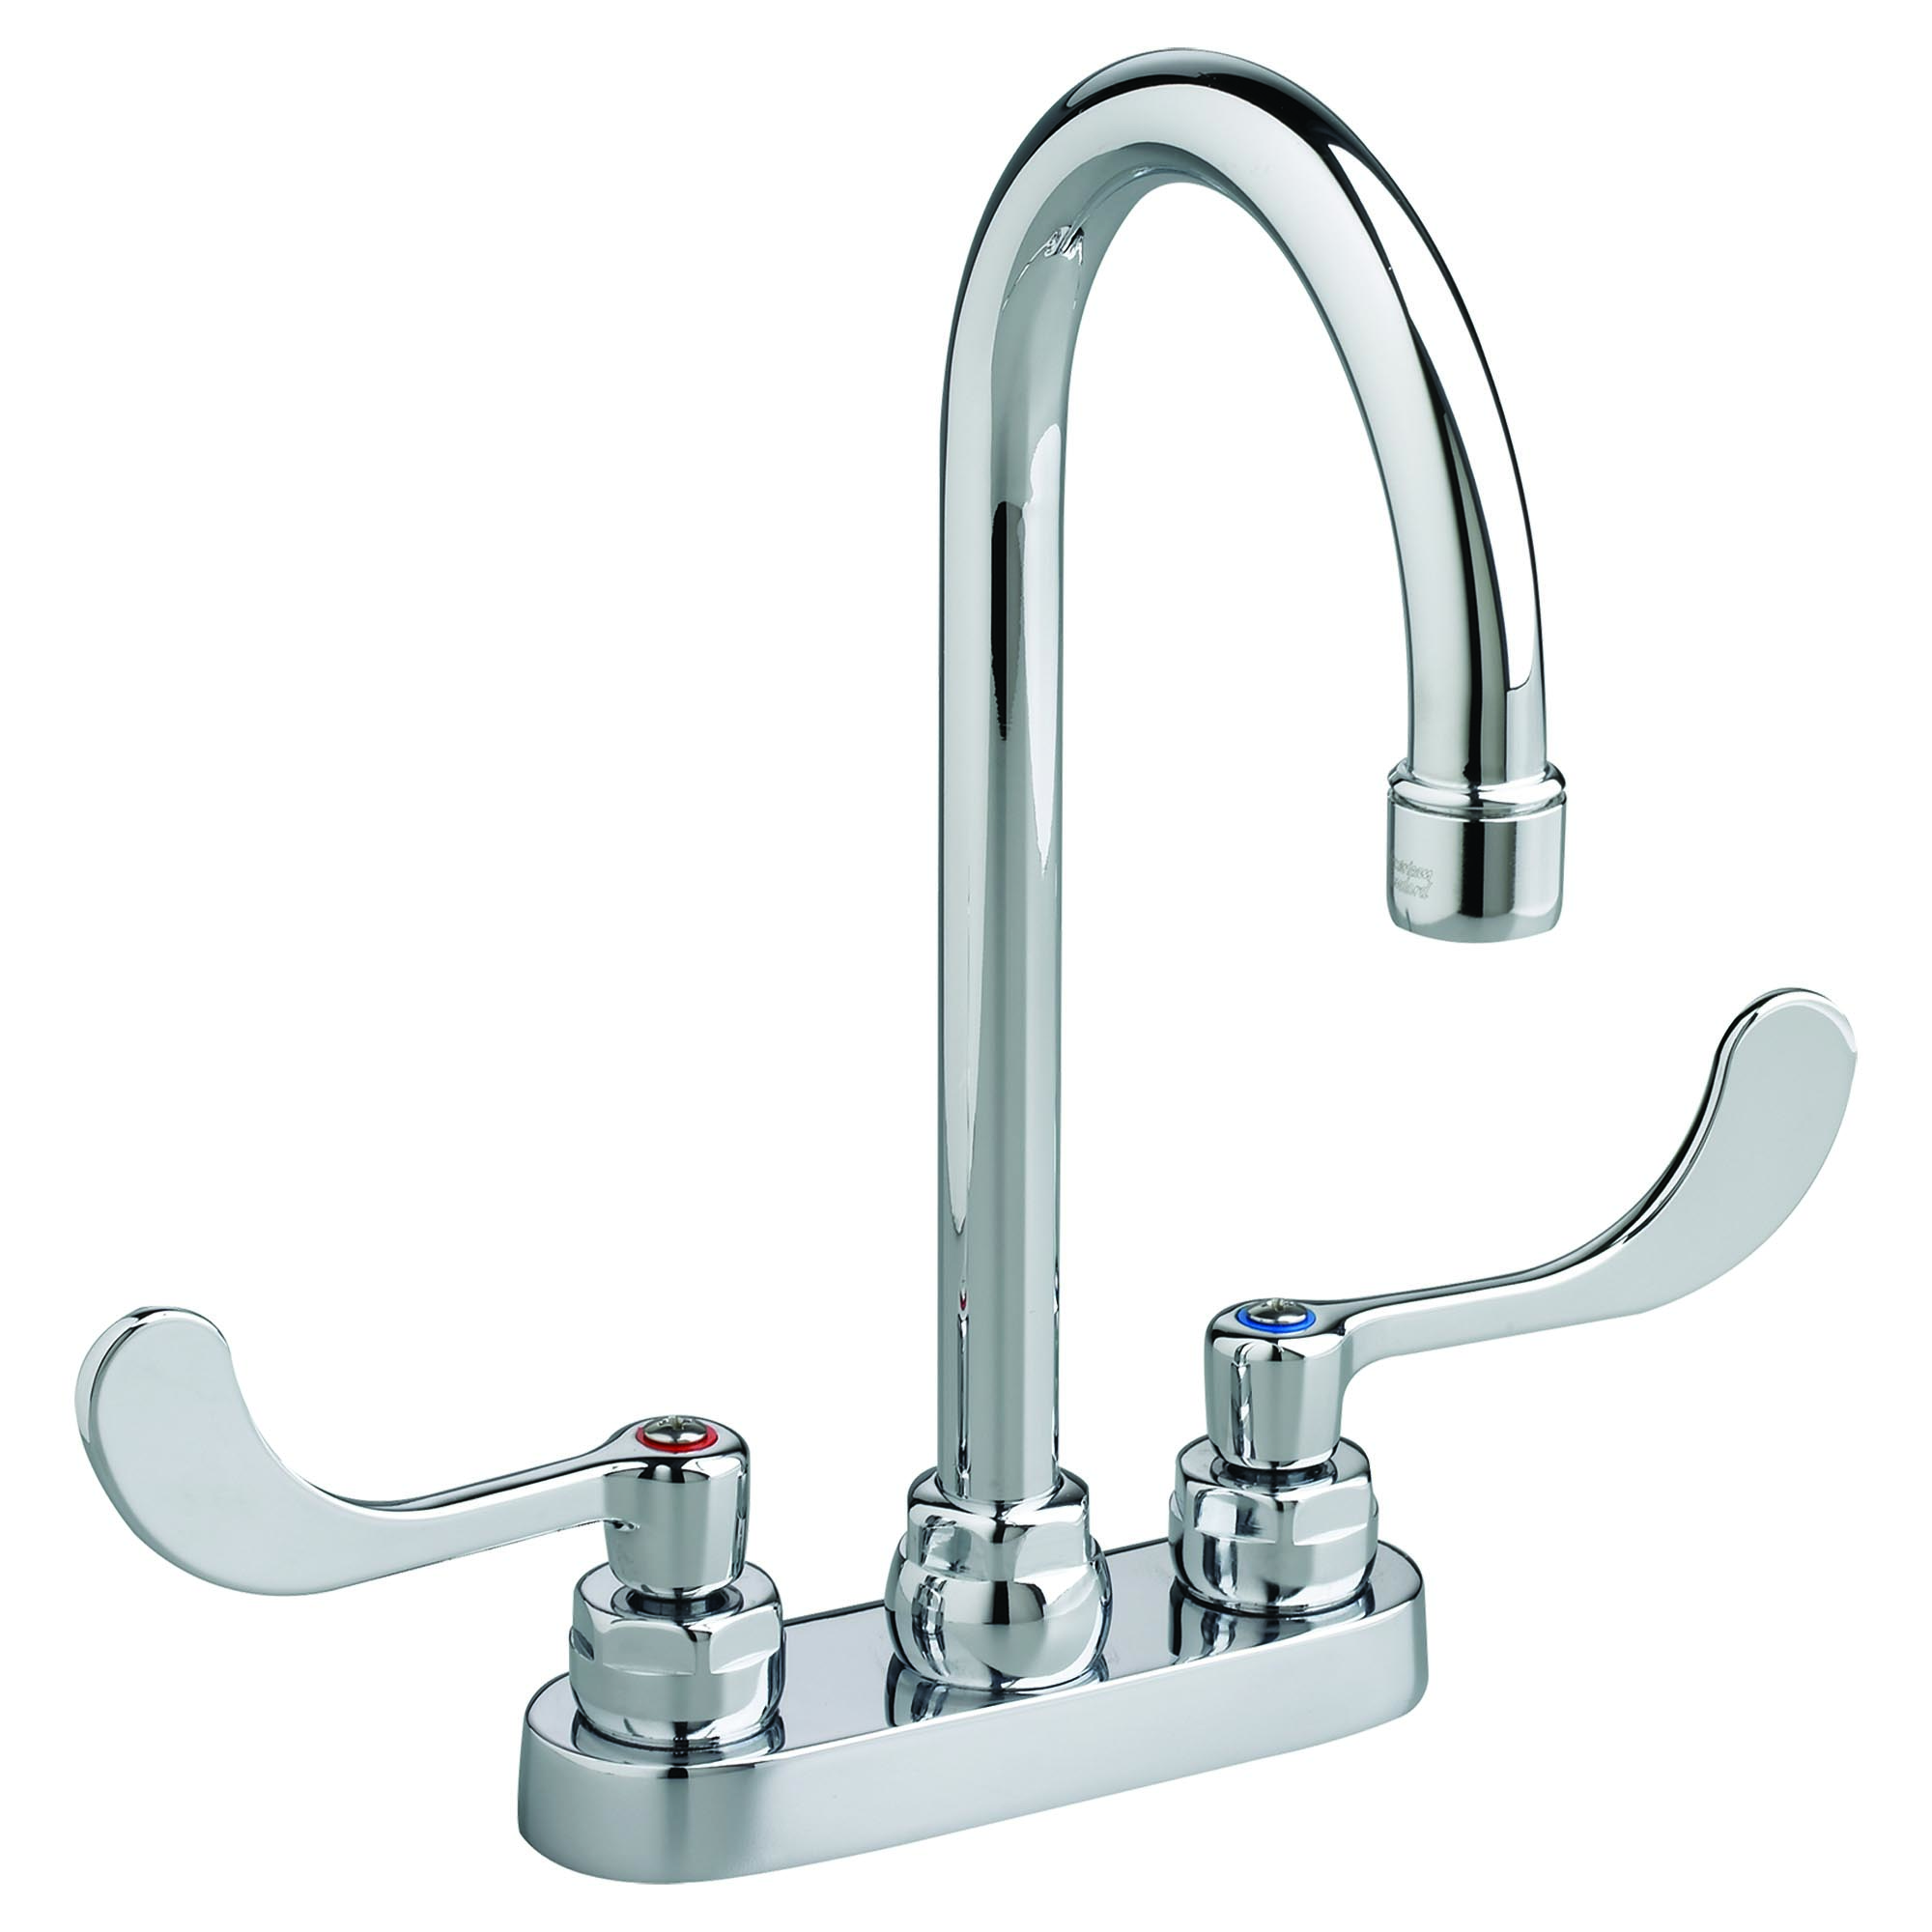 Monterrey® 4-Inch Centerset Gooseneck Faucet With Wrist Blade Handles 1.5 gpm/5.7 Lpm With Limited Swivel